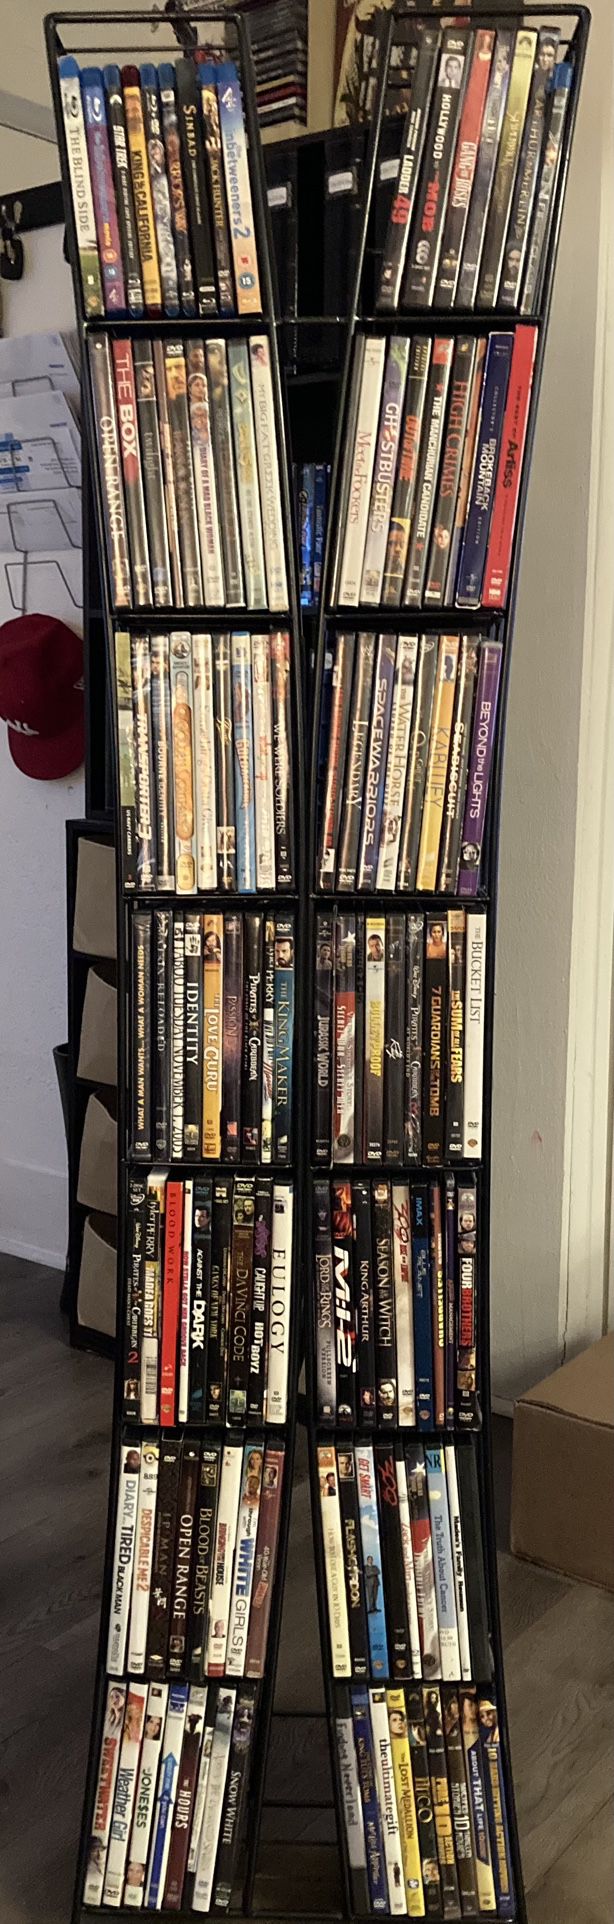 DVDs , Storage Shelf And CDs For Sale